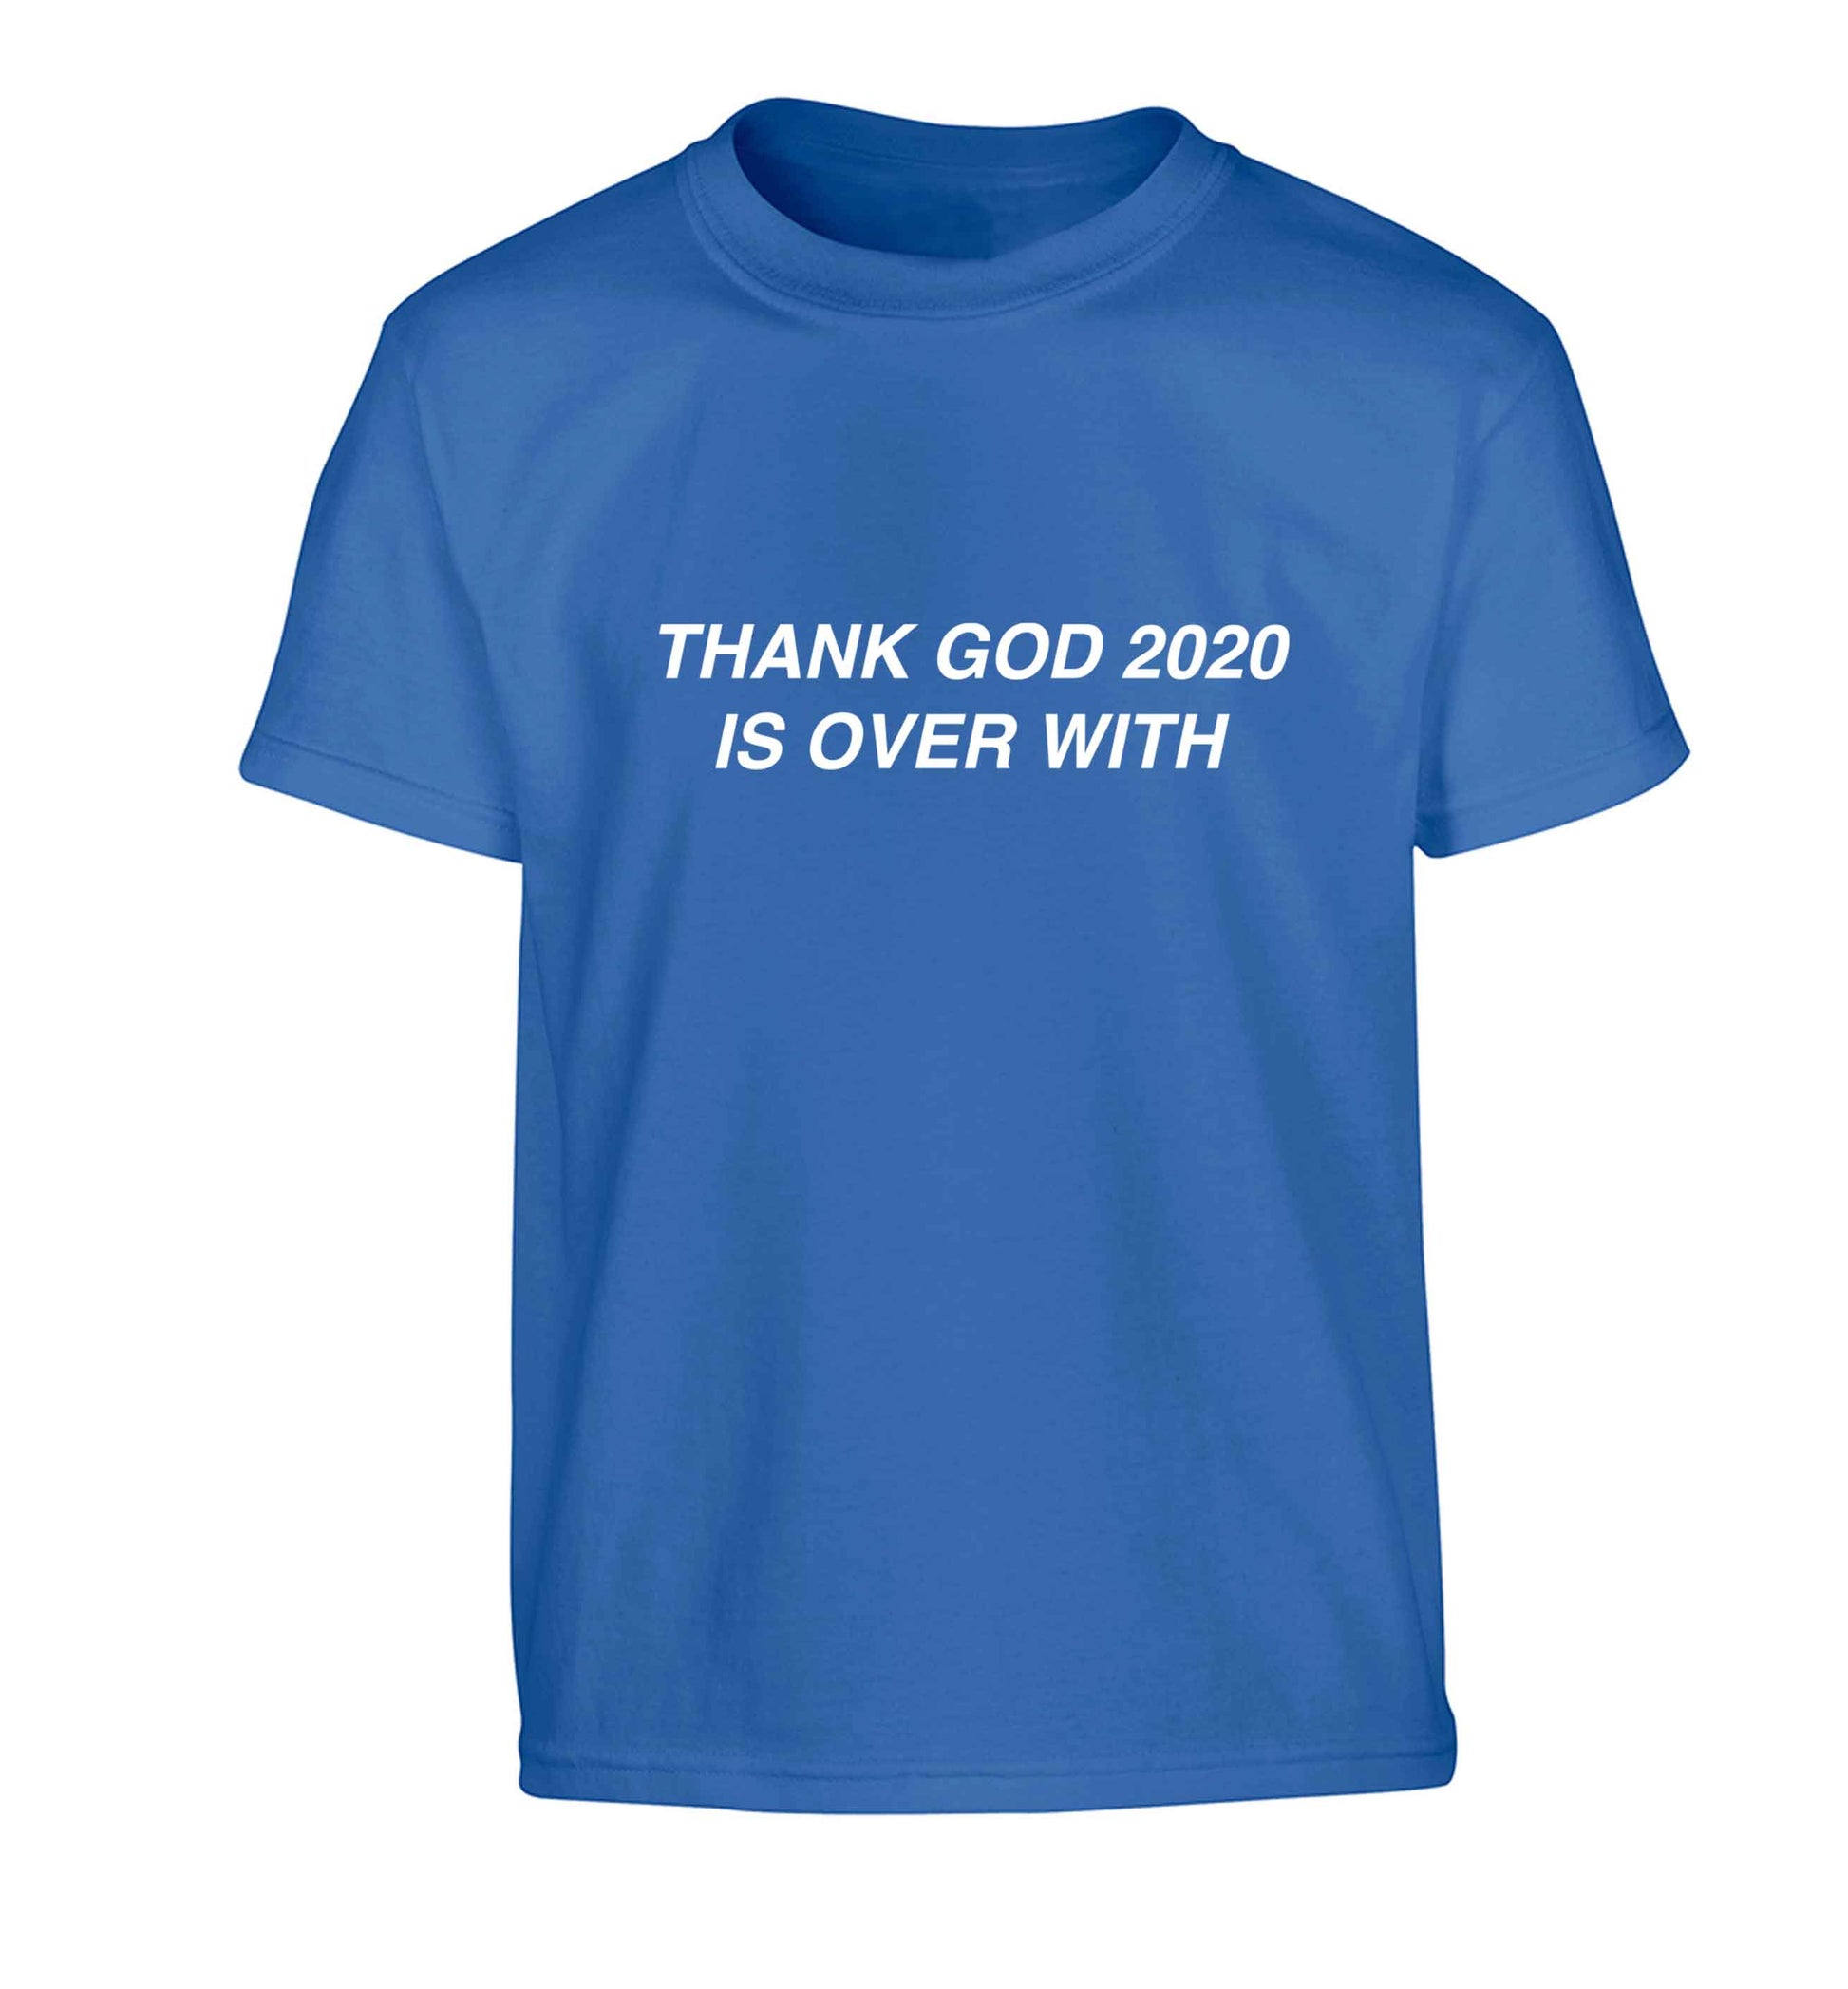 Thank god 2020 is over with Children's blue Tshirt 12-13 Years